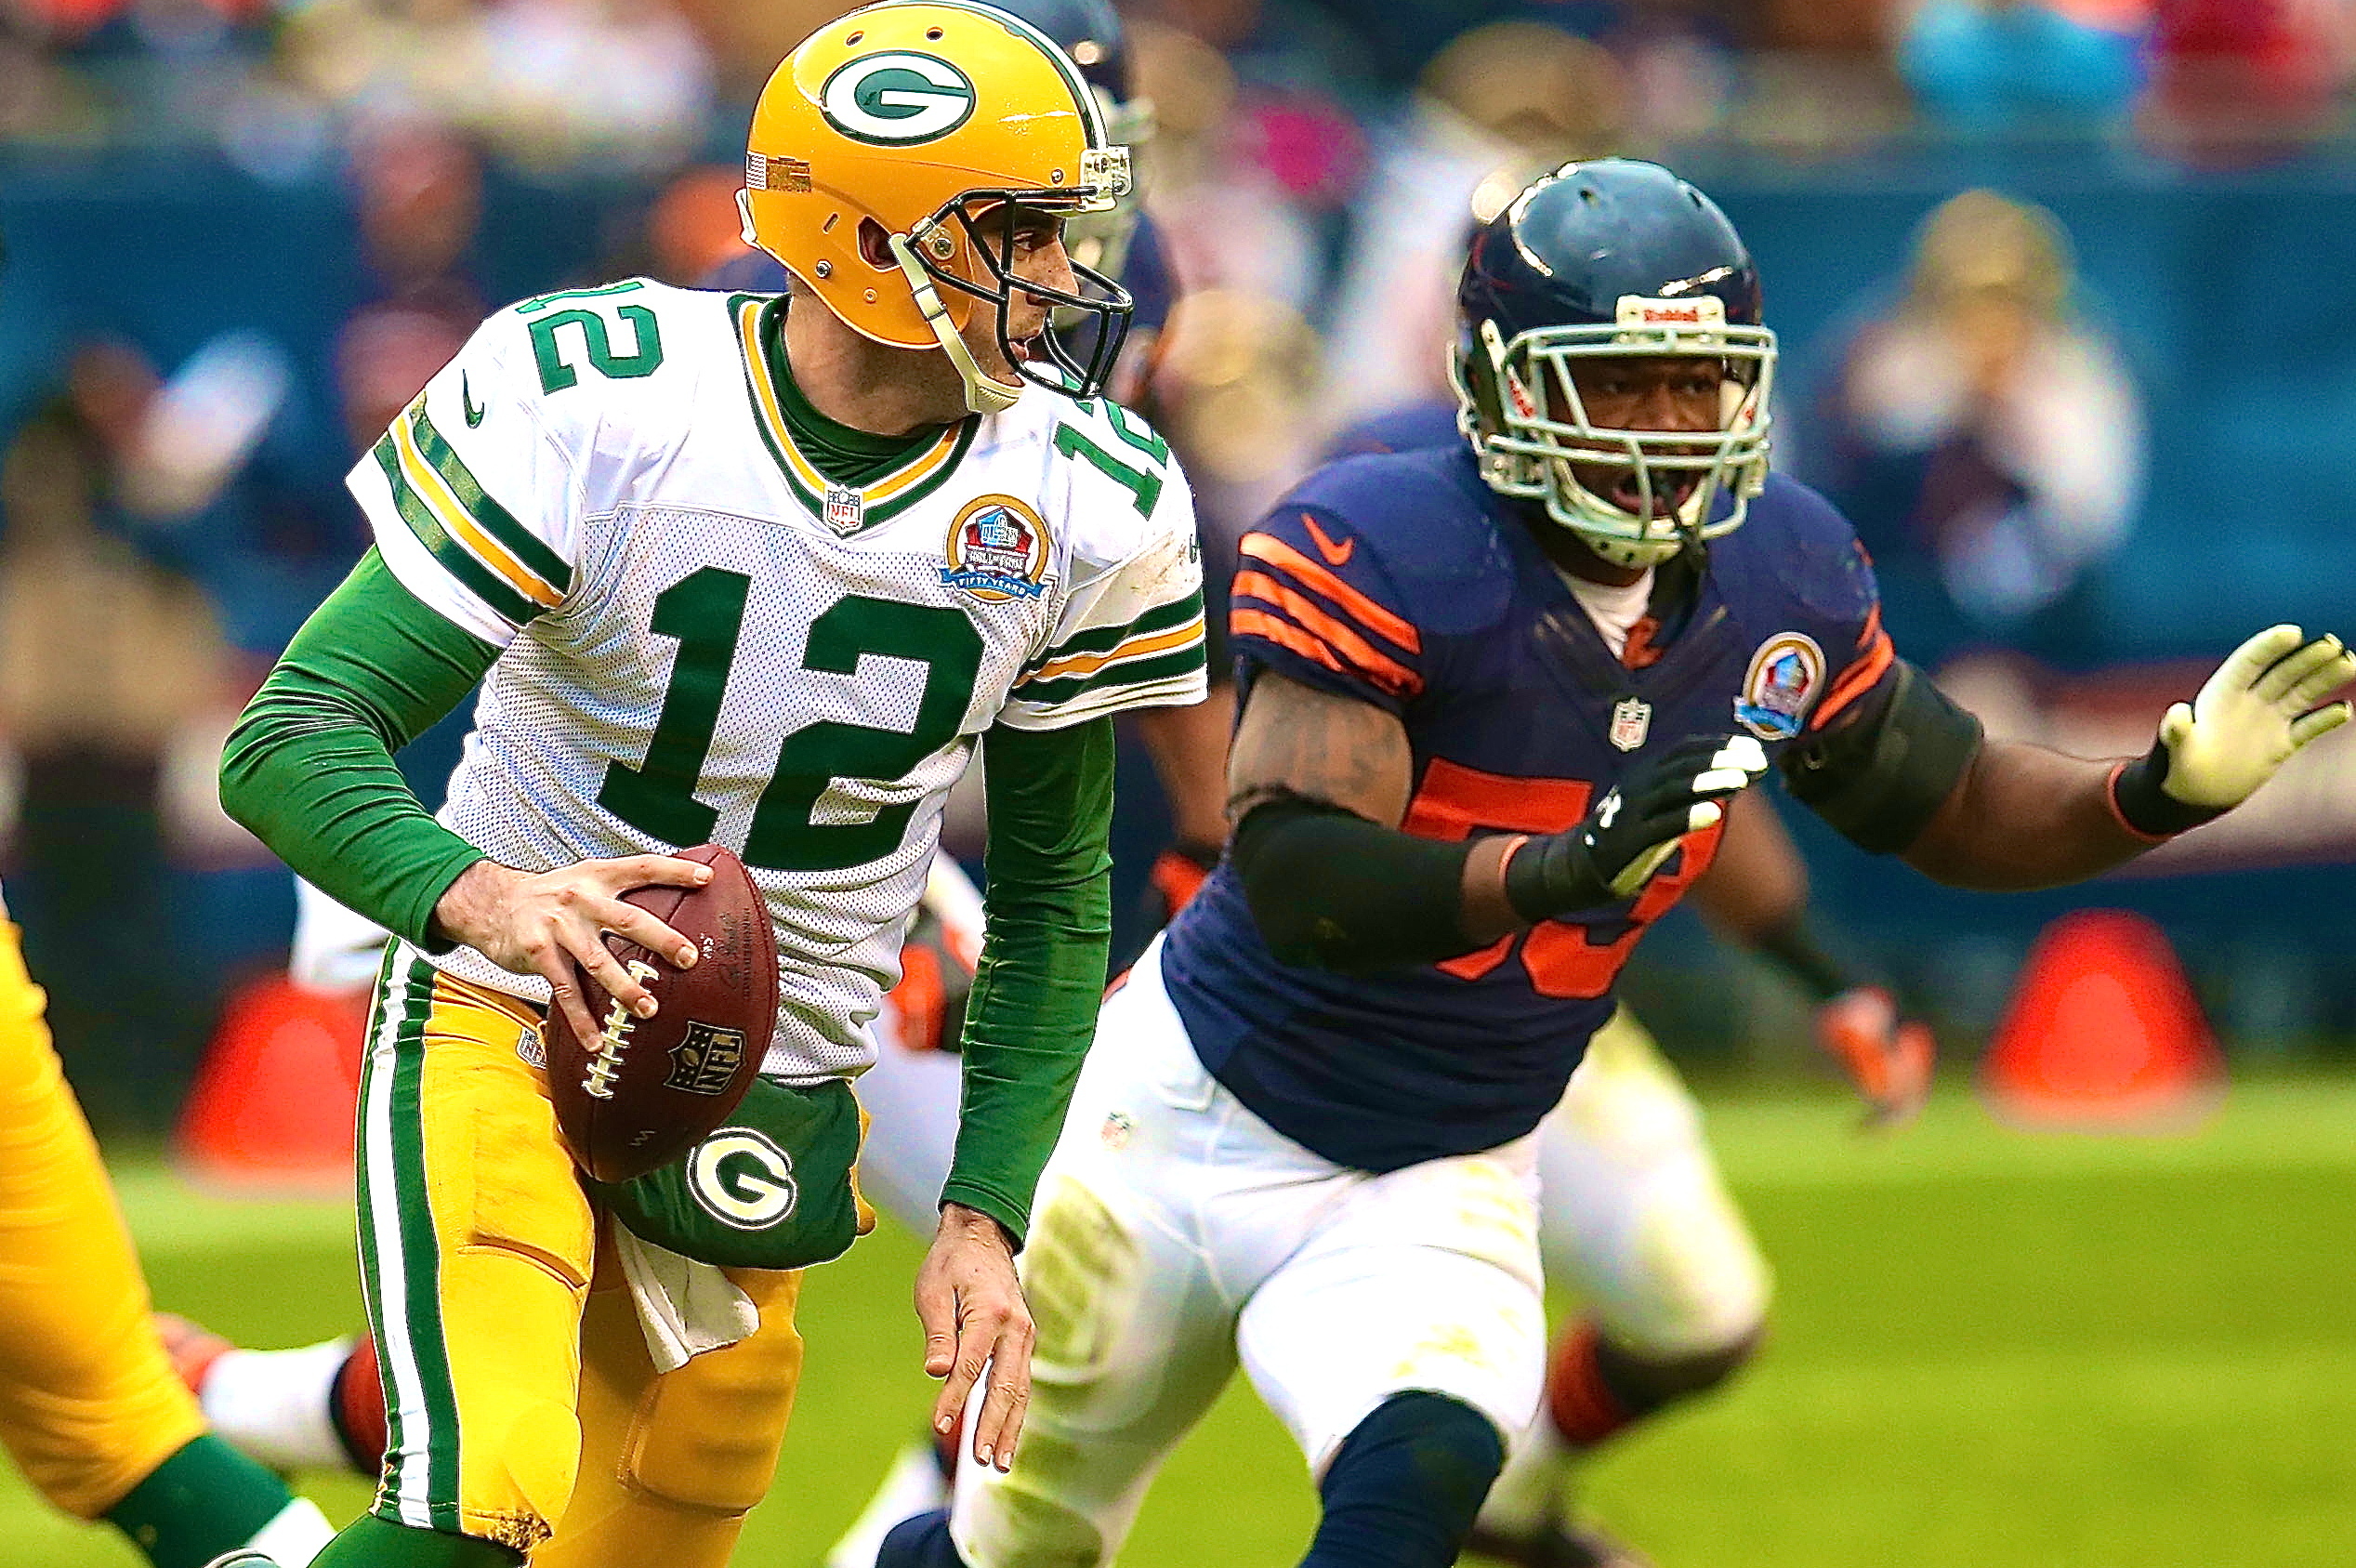 Green Bay Packers vs. Chicago Bears Live Score, Highlights and